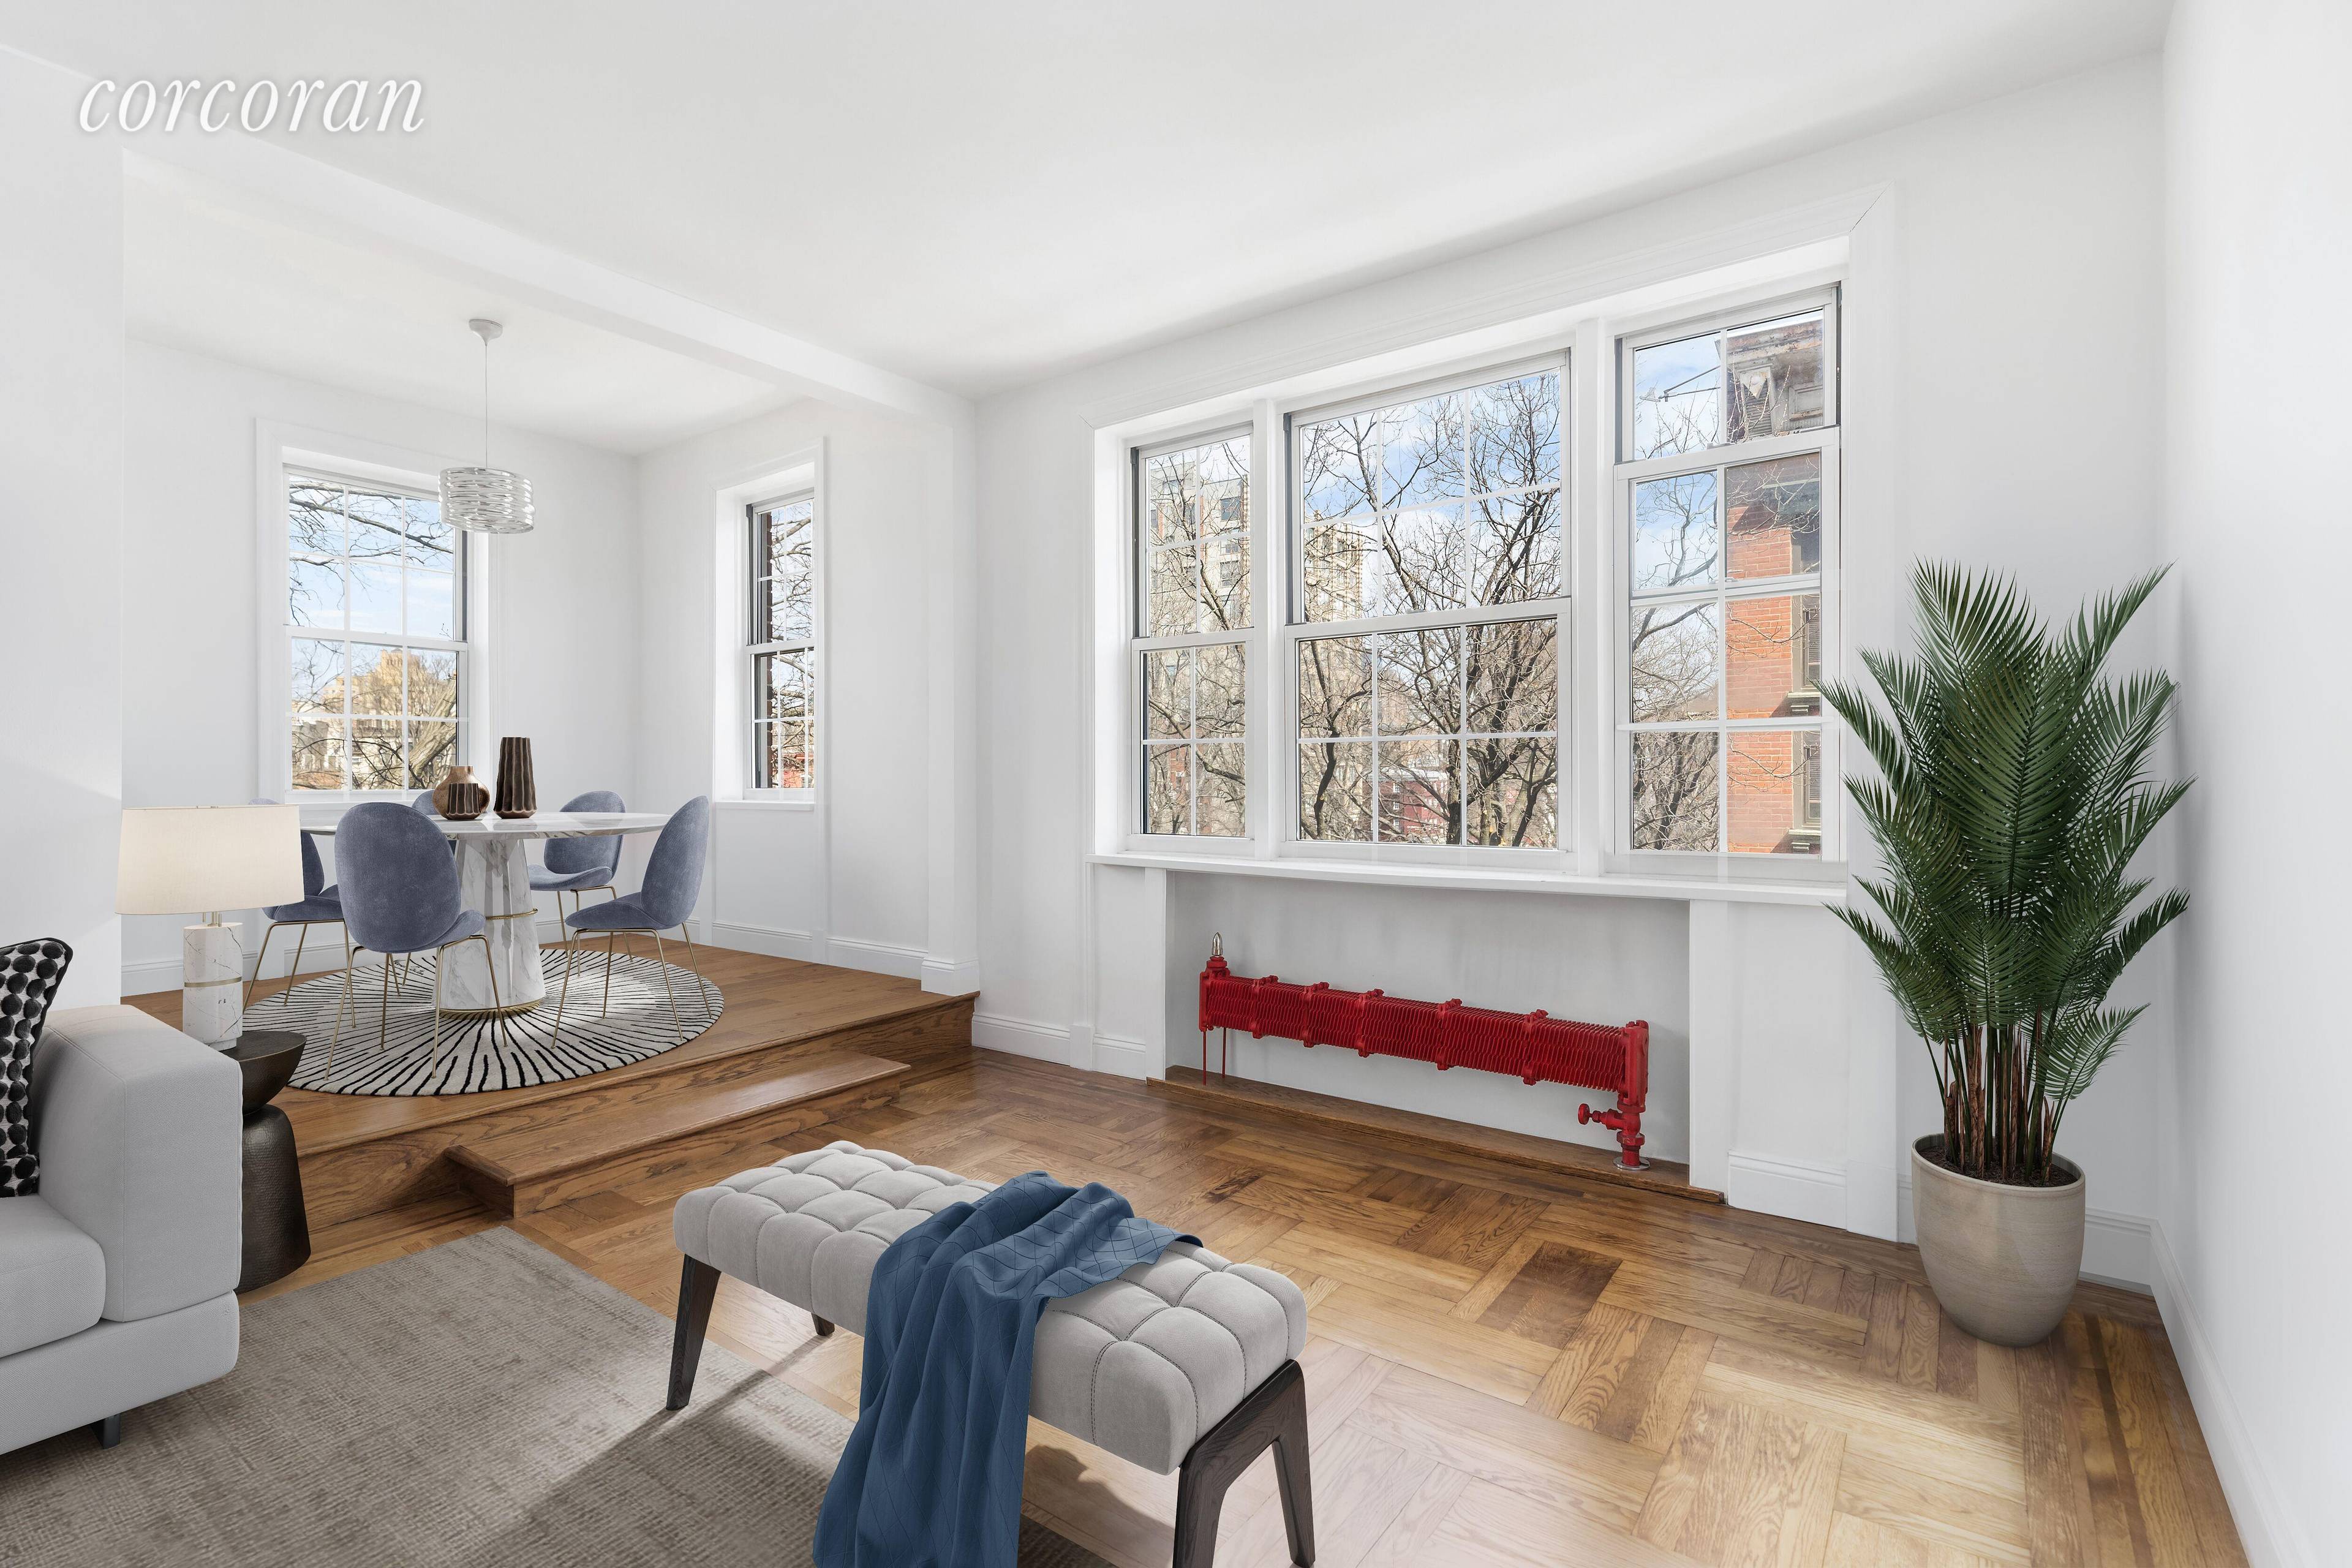 Located at 25 Minetta Lane, one of the most coveted Art Deco Pre War buildings in Greenwich Village, this sun filled one bedroom offers village charm with a modern flair.